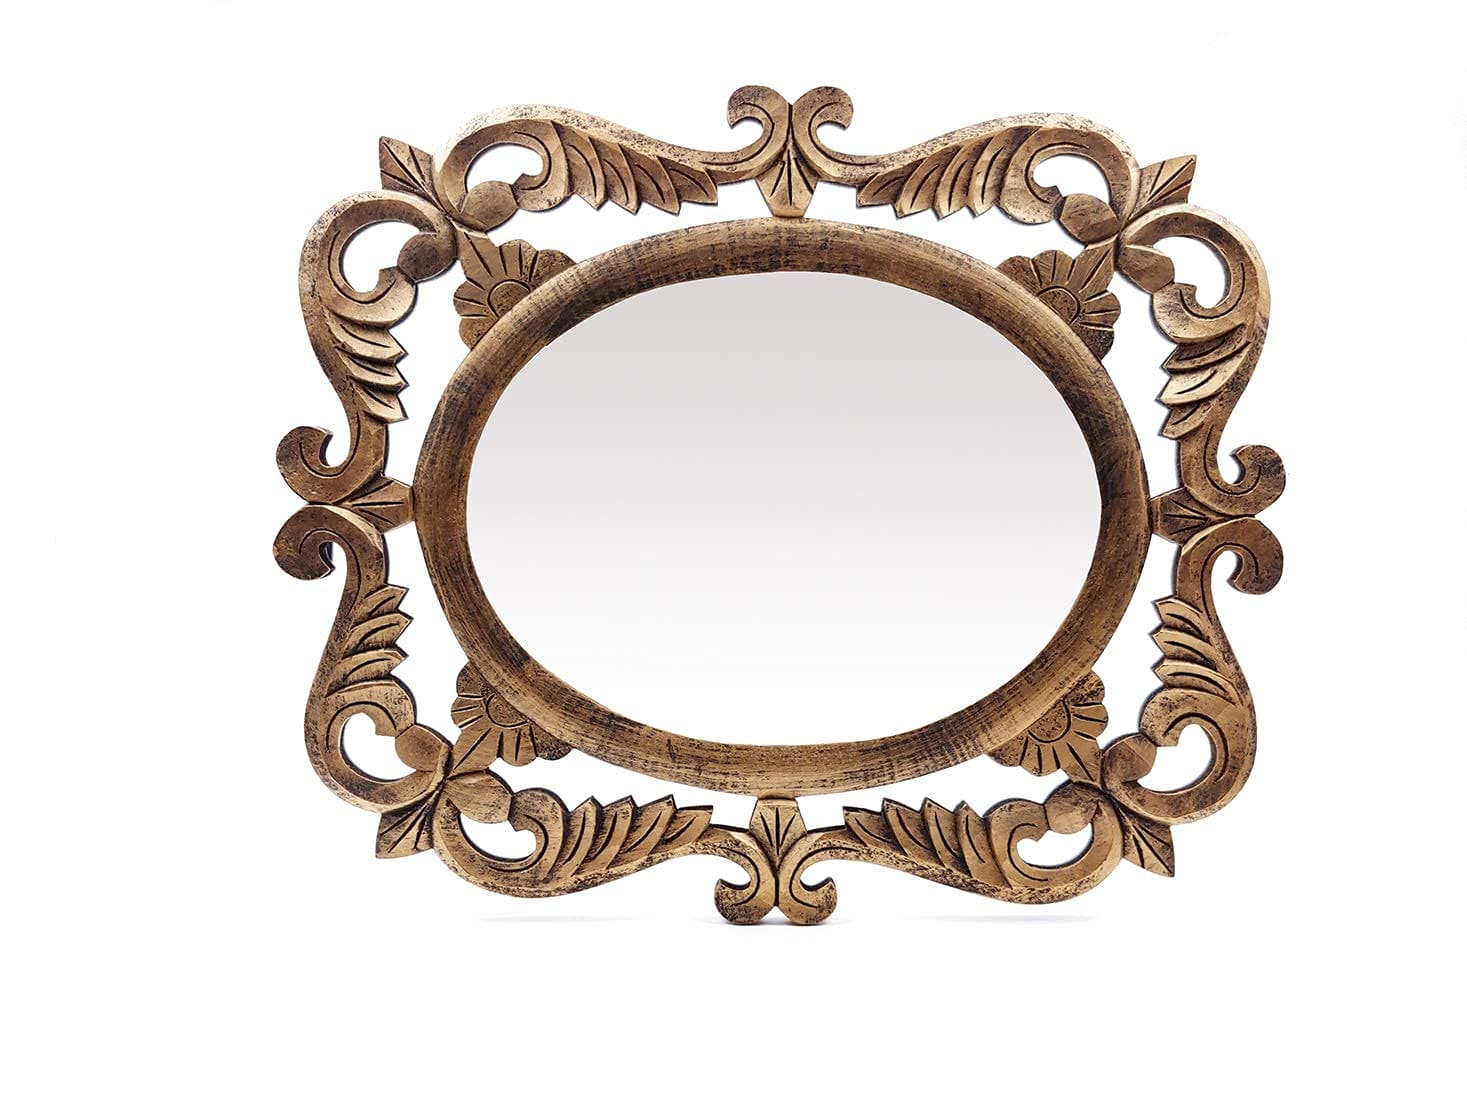 Handcrafted Wooden Wall Mirror for Home Décor (50 cm x 2 cm x 60 cm, Gold)